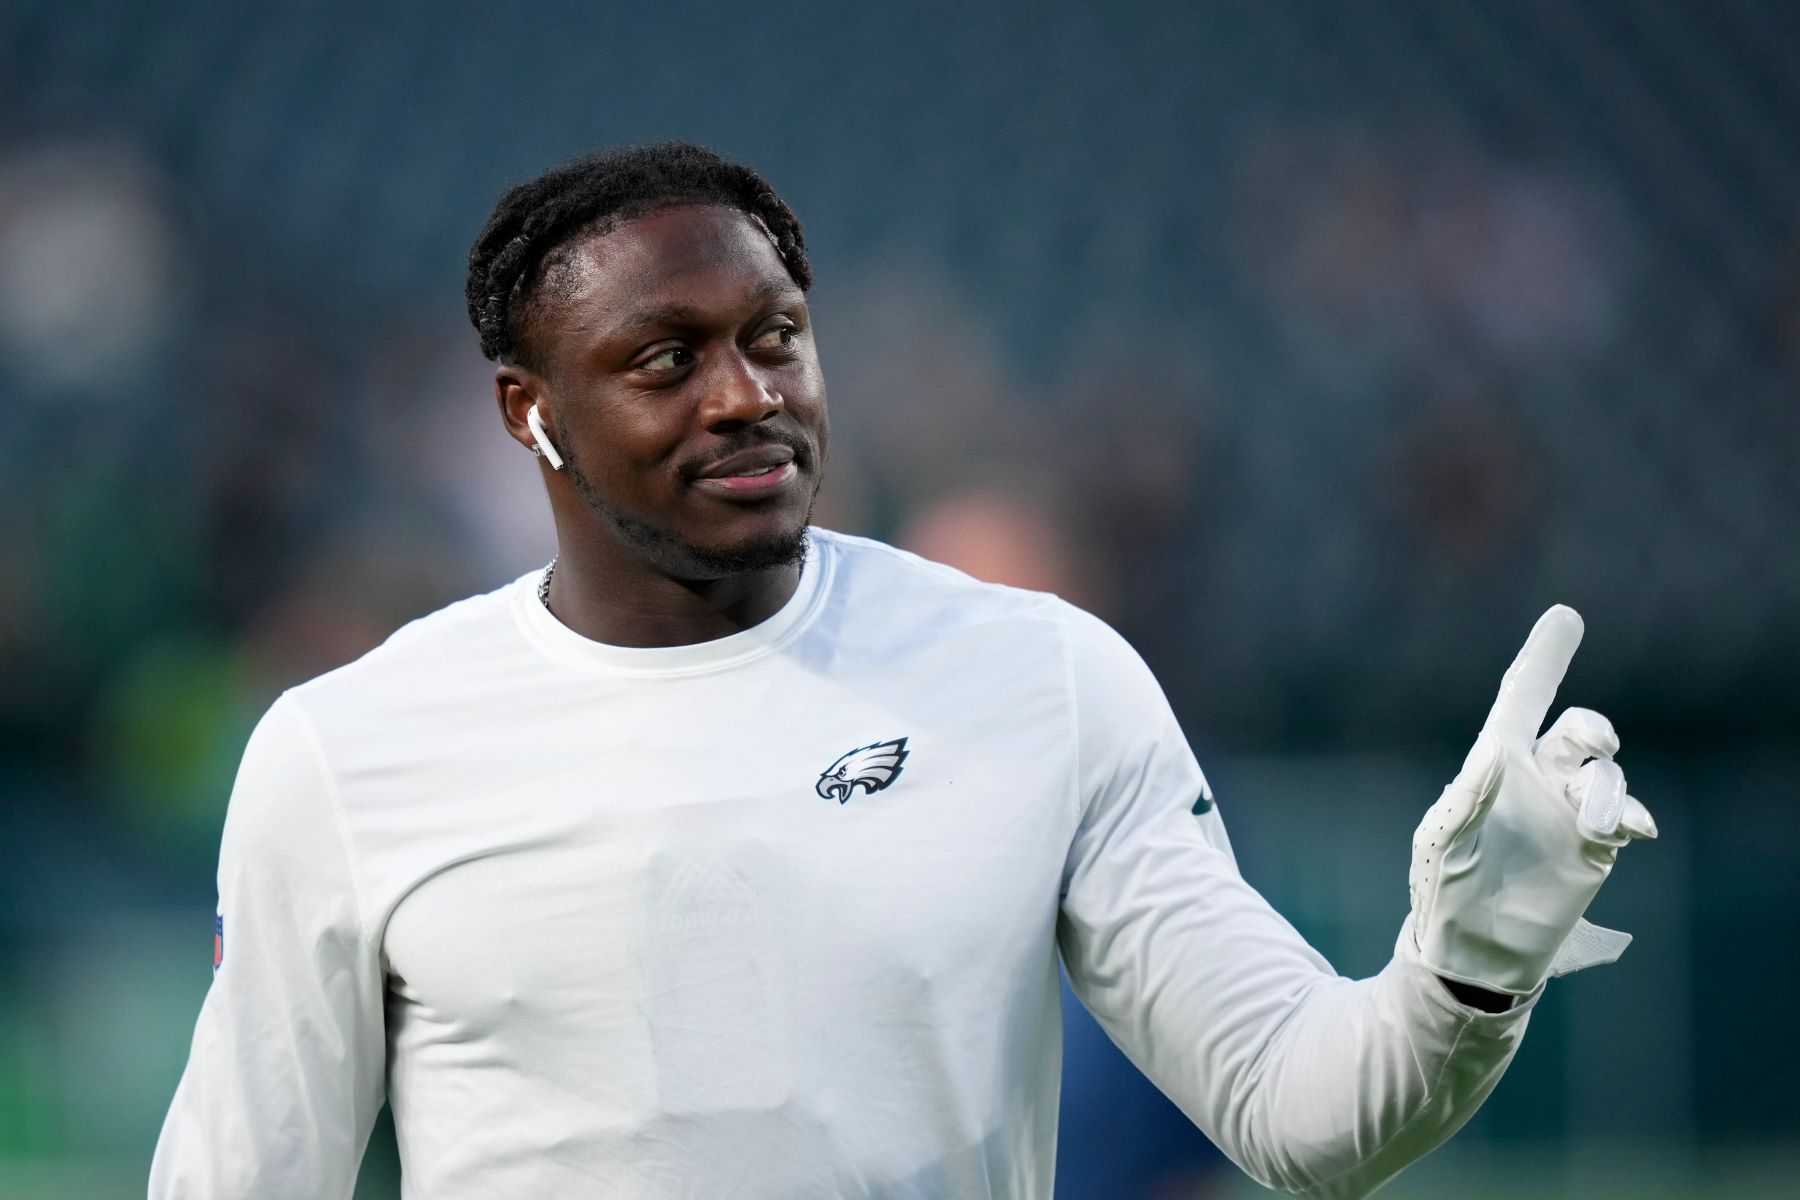 Eagles Star A.J. Brown Calls Out NFL’s Cleat Policy, Expresses Frustration